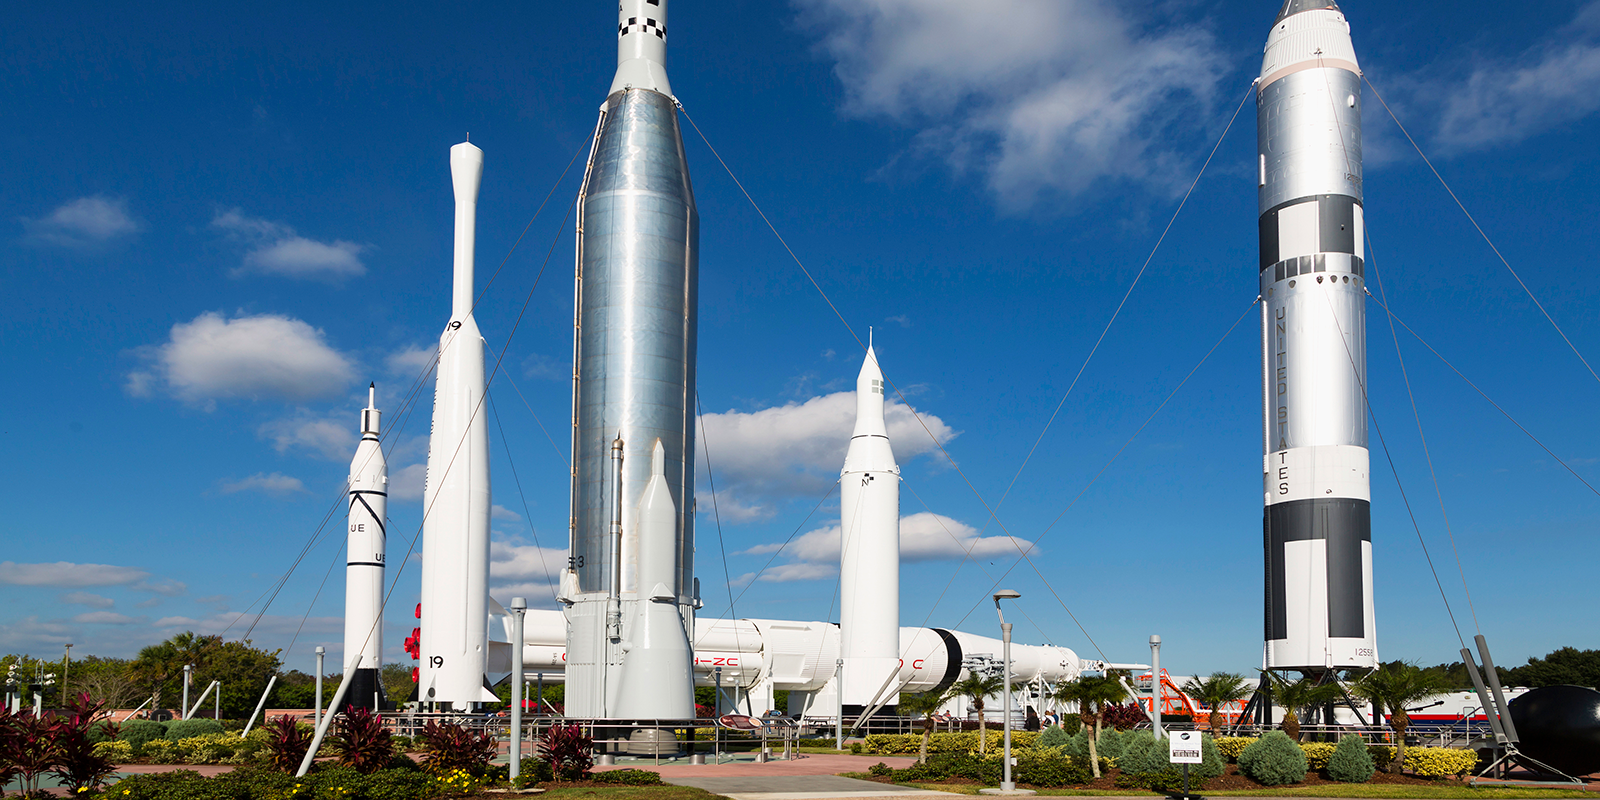 A picture of the rocket garden at the Kennedy Space Center